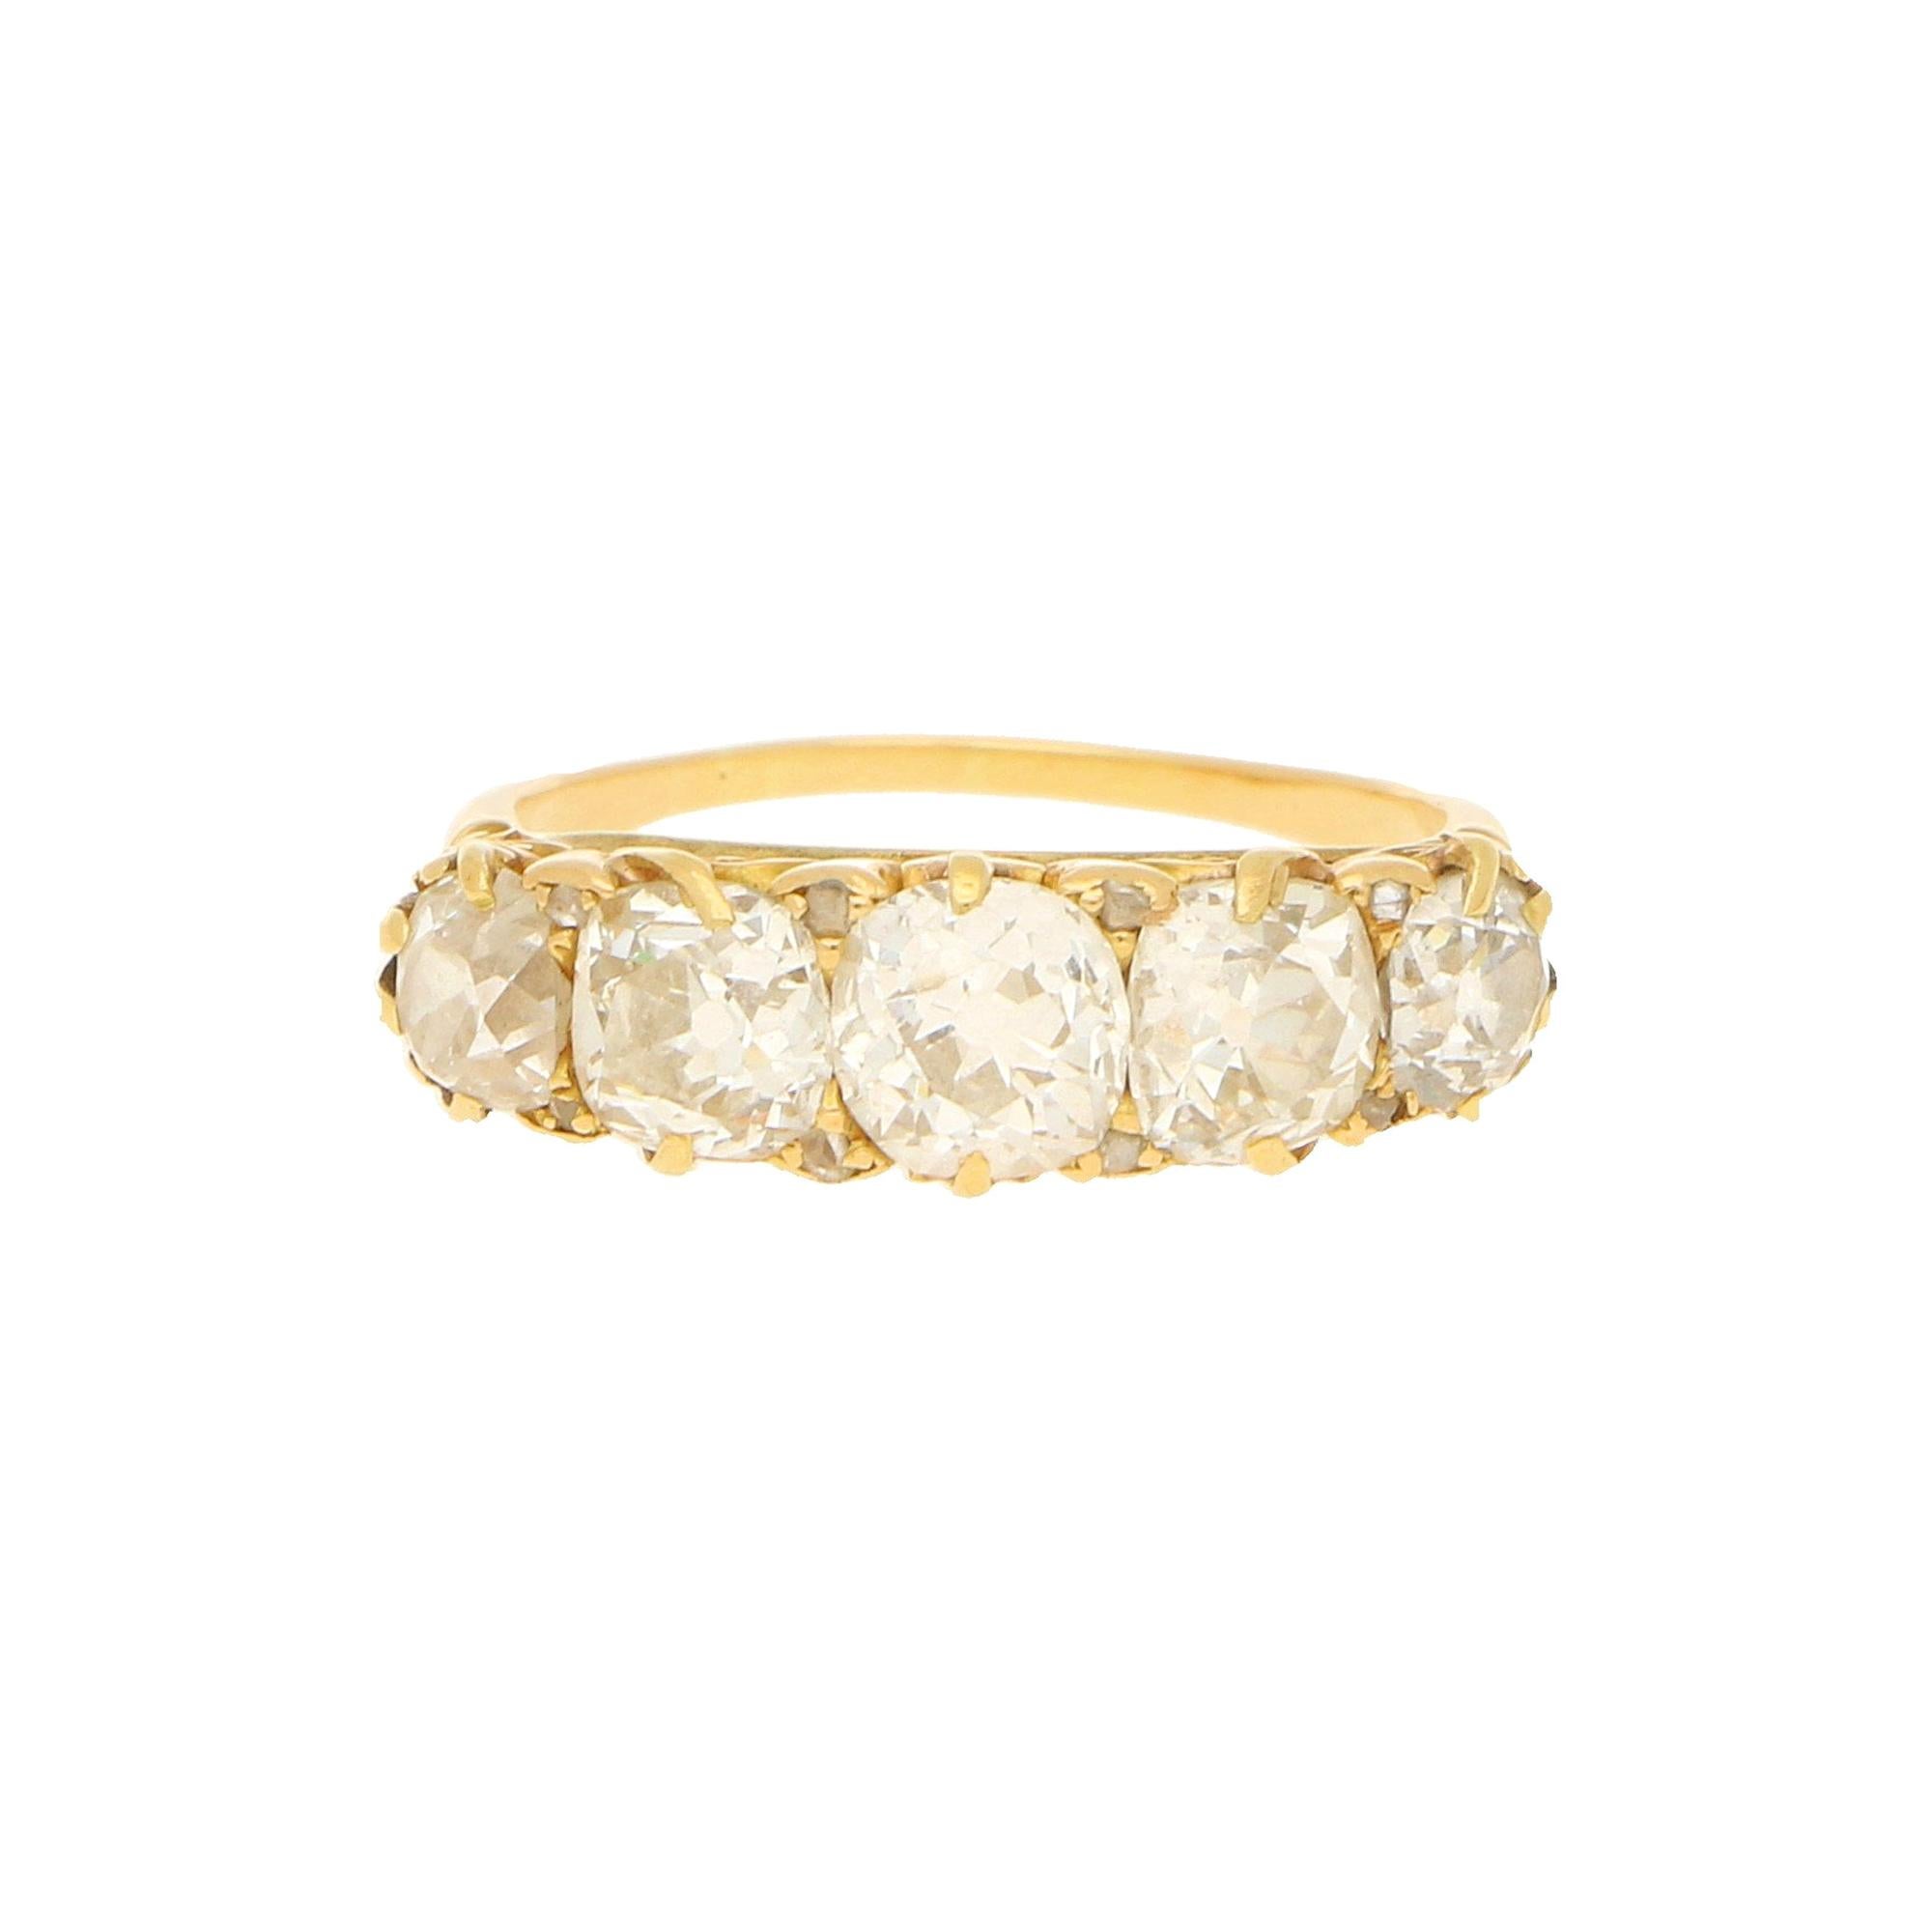 Victorian Old Cut Diamond Five-Stone Engagement Ring in 18k Yellow Gold 